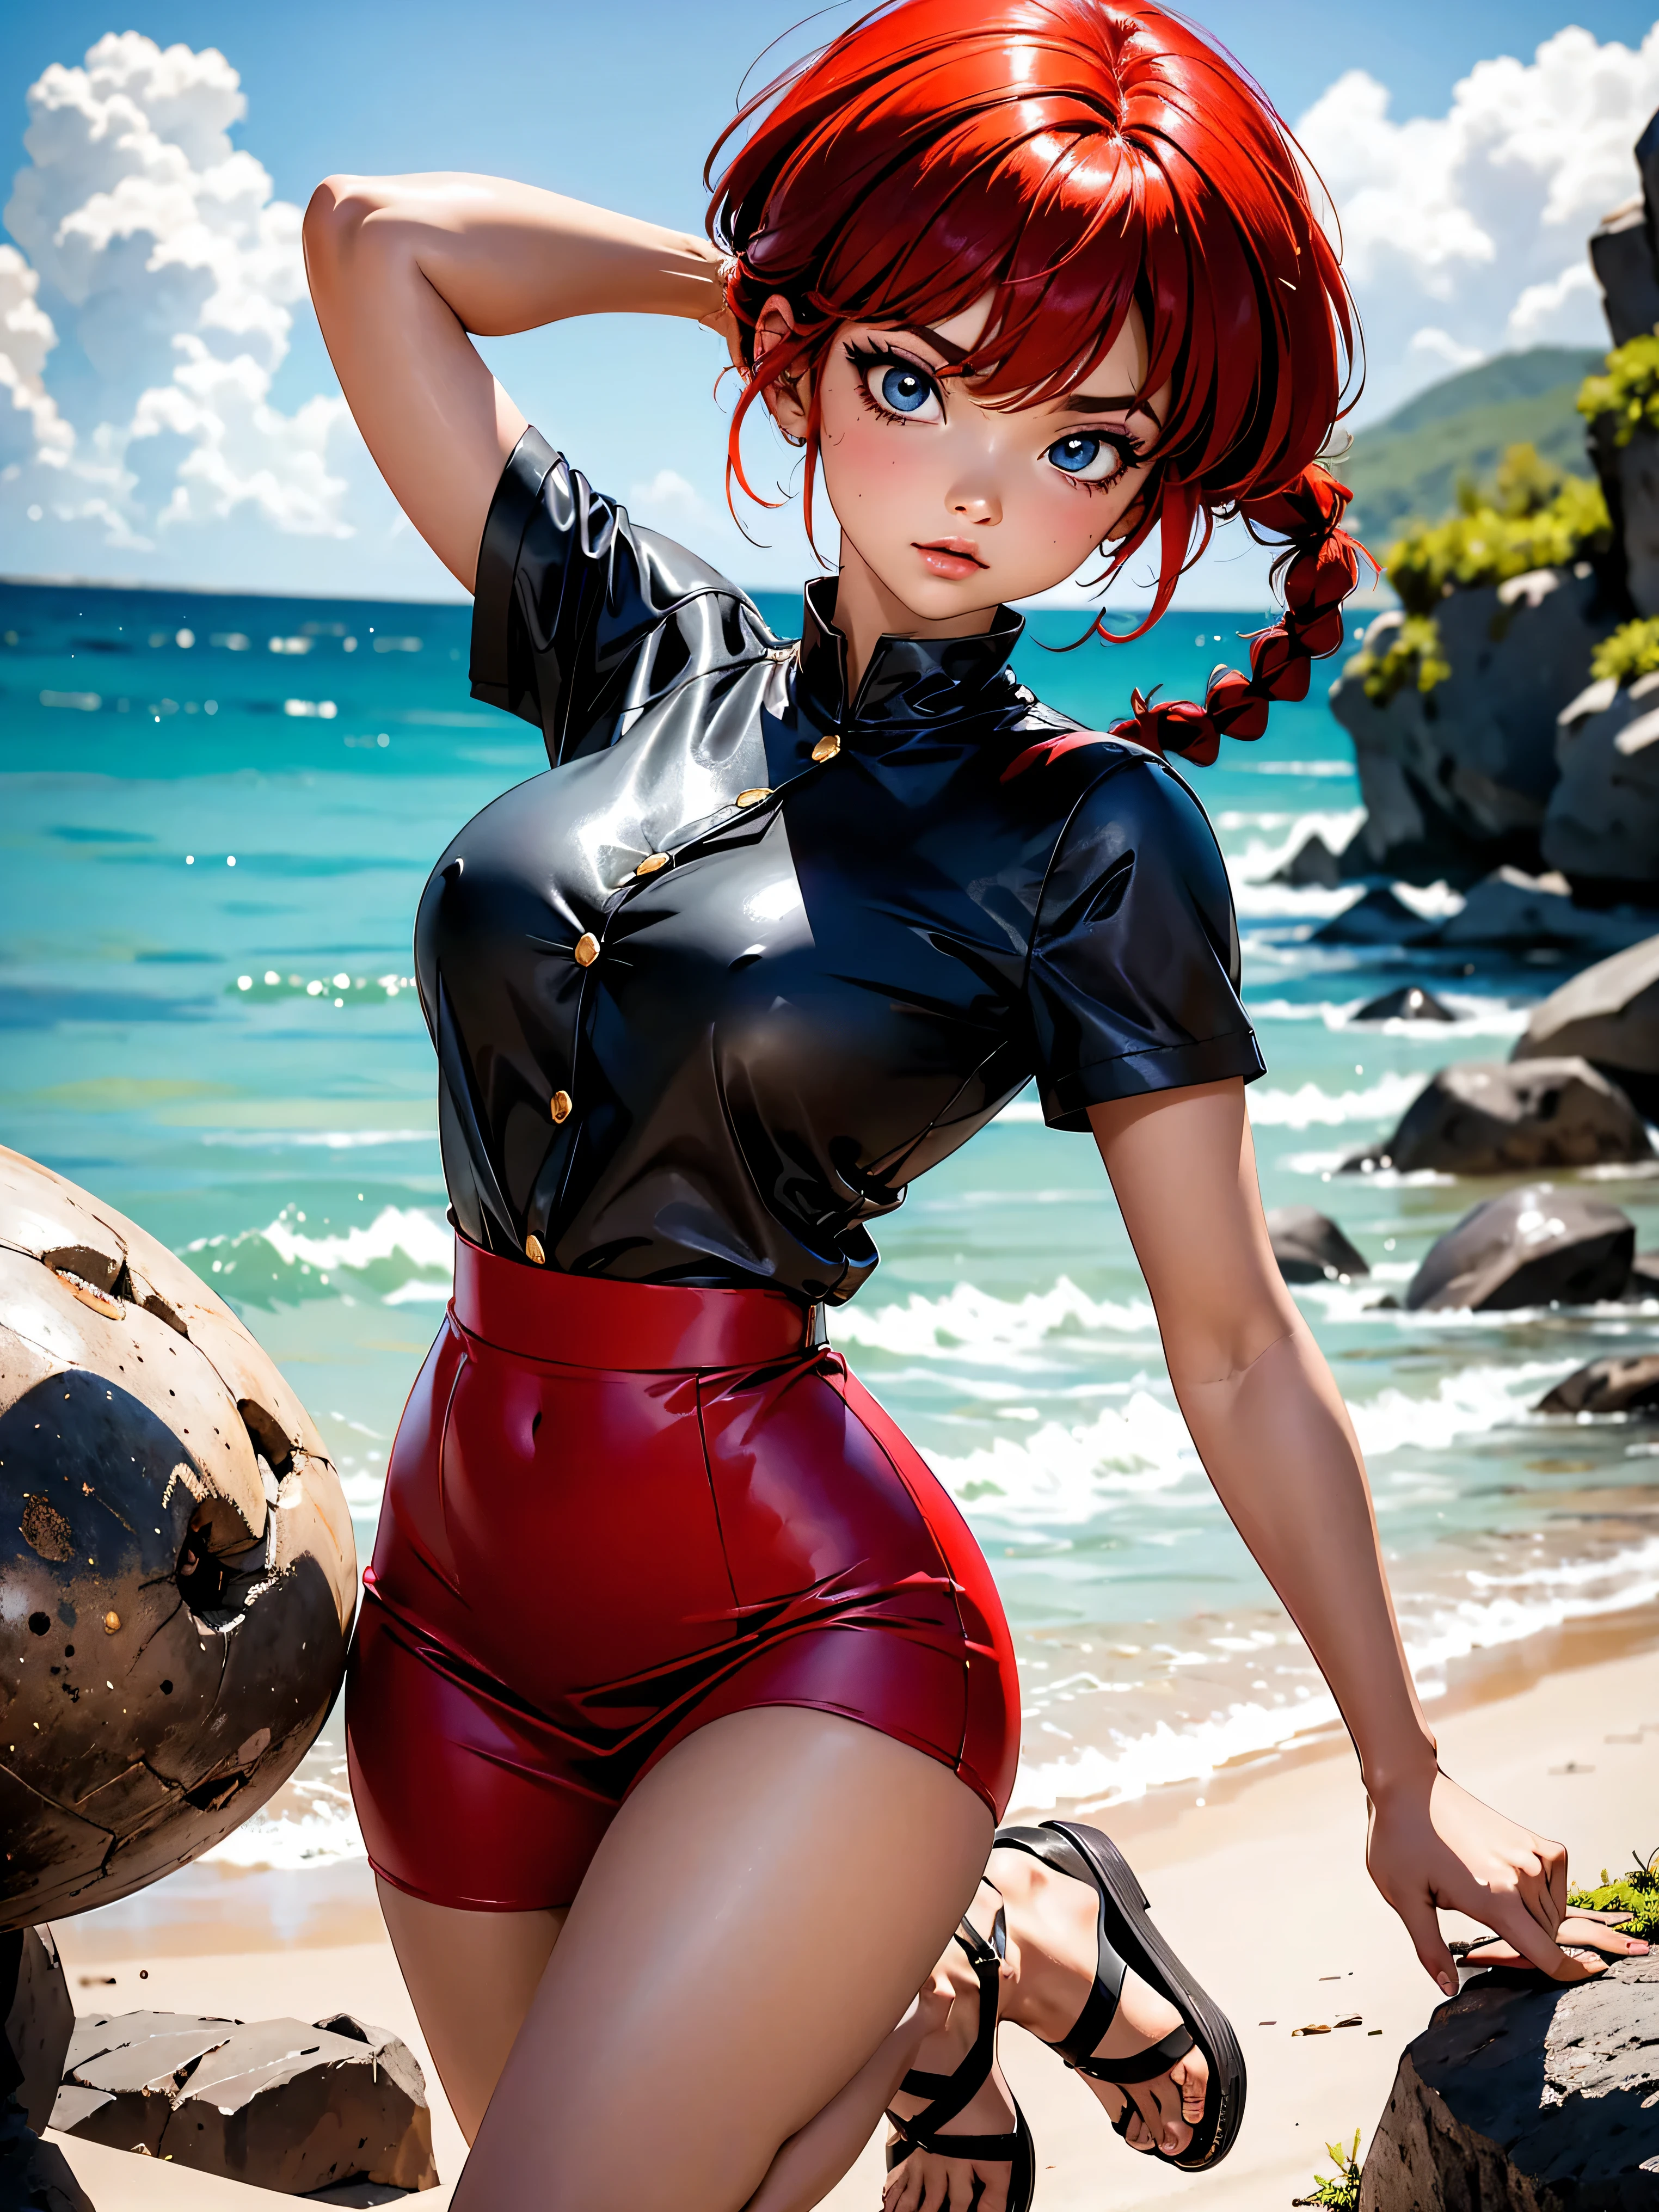 Redhead anime girl with denim shorts and red dress, overskirt, 16 yrs old, Body cute, breasts big, with hands behind head, running your hands through your hair, sexy girl, red short hair with braid, side hair highlights, locks of hair on the side of the face, beautiful lighting, softshadows, blue colored eyes, pretty legs, short hair with braid, anime styling, ranma chan, Autora Rumiko Takahashi, Based on a work by Rumiko Takahashi, Anime Ranma 1/ 2, decote sexy, robust hip, fully body, fully body, Bust Big, young girl with beautiful and beautiful body taking a shower in the rain, sandals on his feet, garota 16 yrs old jovem baixa estatura, wearing jeans, anime girl, anime styling, beautiful feet in sandals, plein-air, red hair braid, beautiful breasts, oil bust